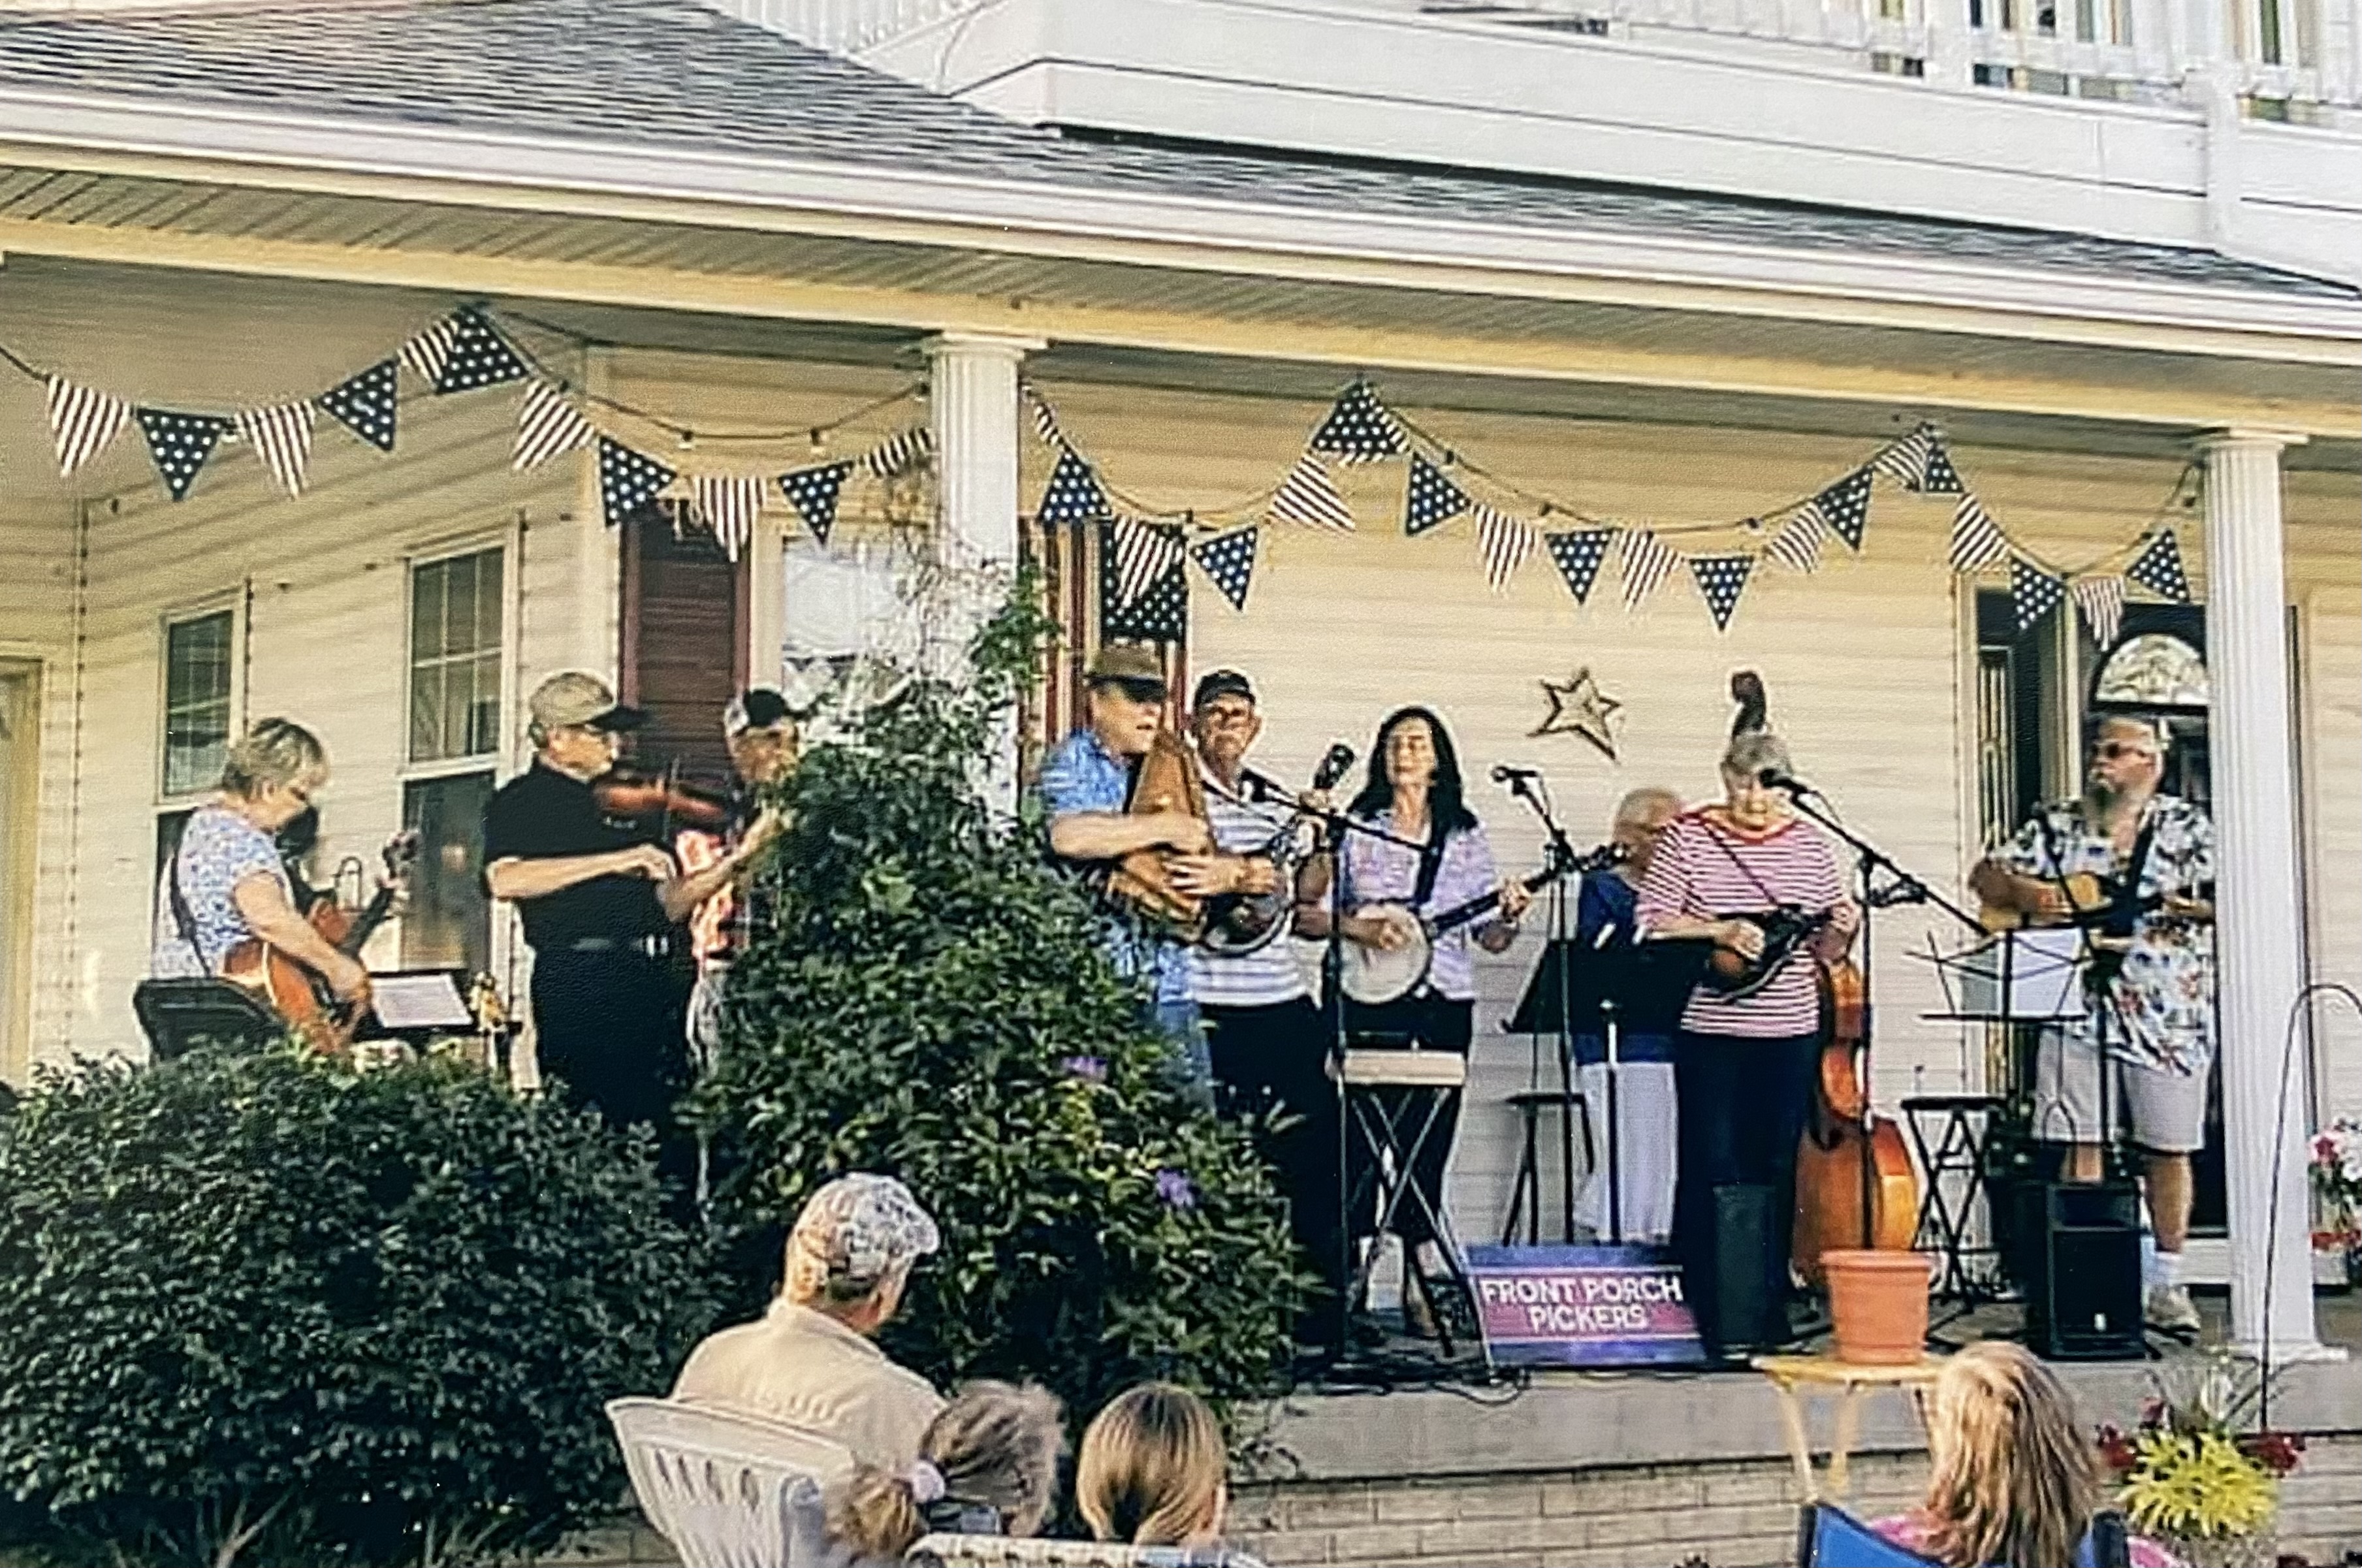 People playing musical instruments on a front porch.